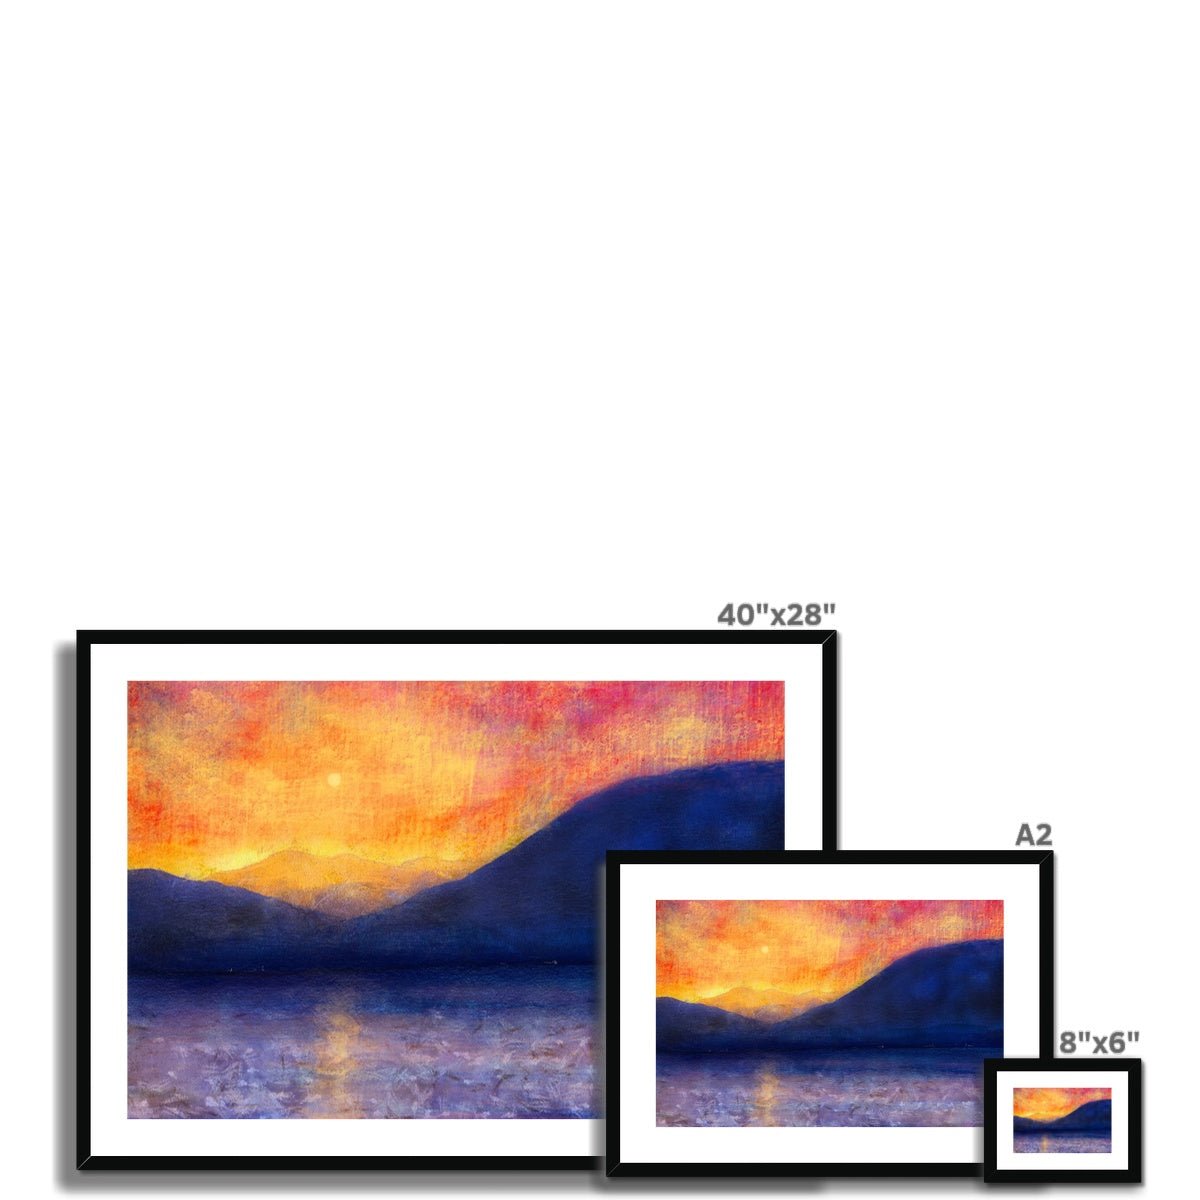 Sunset Approaching Mull Painting | Framed & Mounted Prints From Scotland-Framed & Mounted Prints-Hebridean Islands Art Gallery-Paintings, Prints, Homeware, Art Gifts From Scotland By Scottish Artist Kevin Hunter